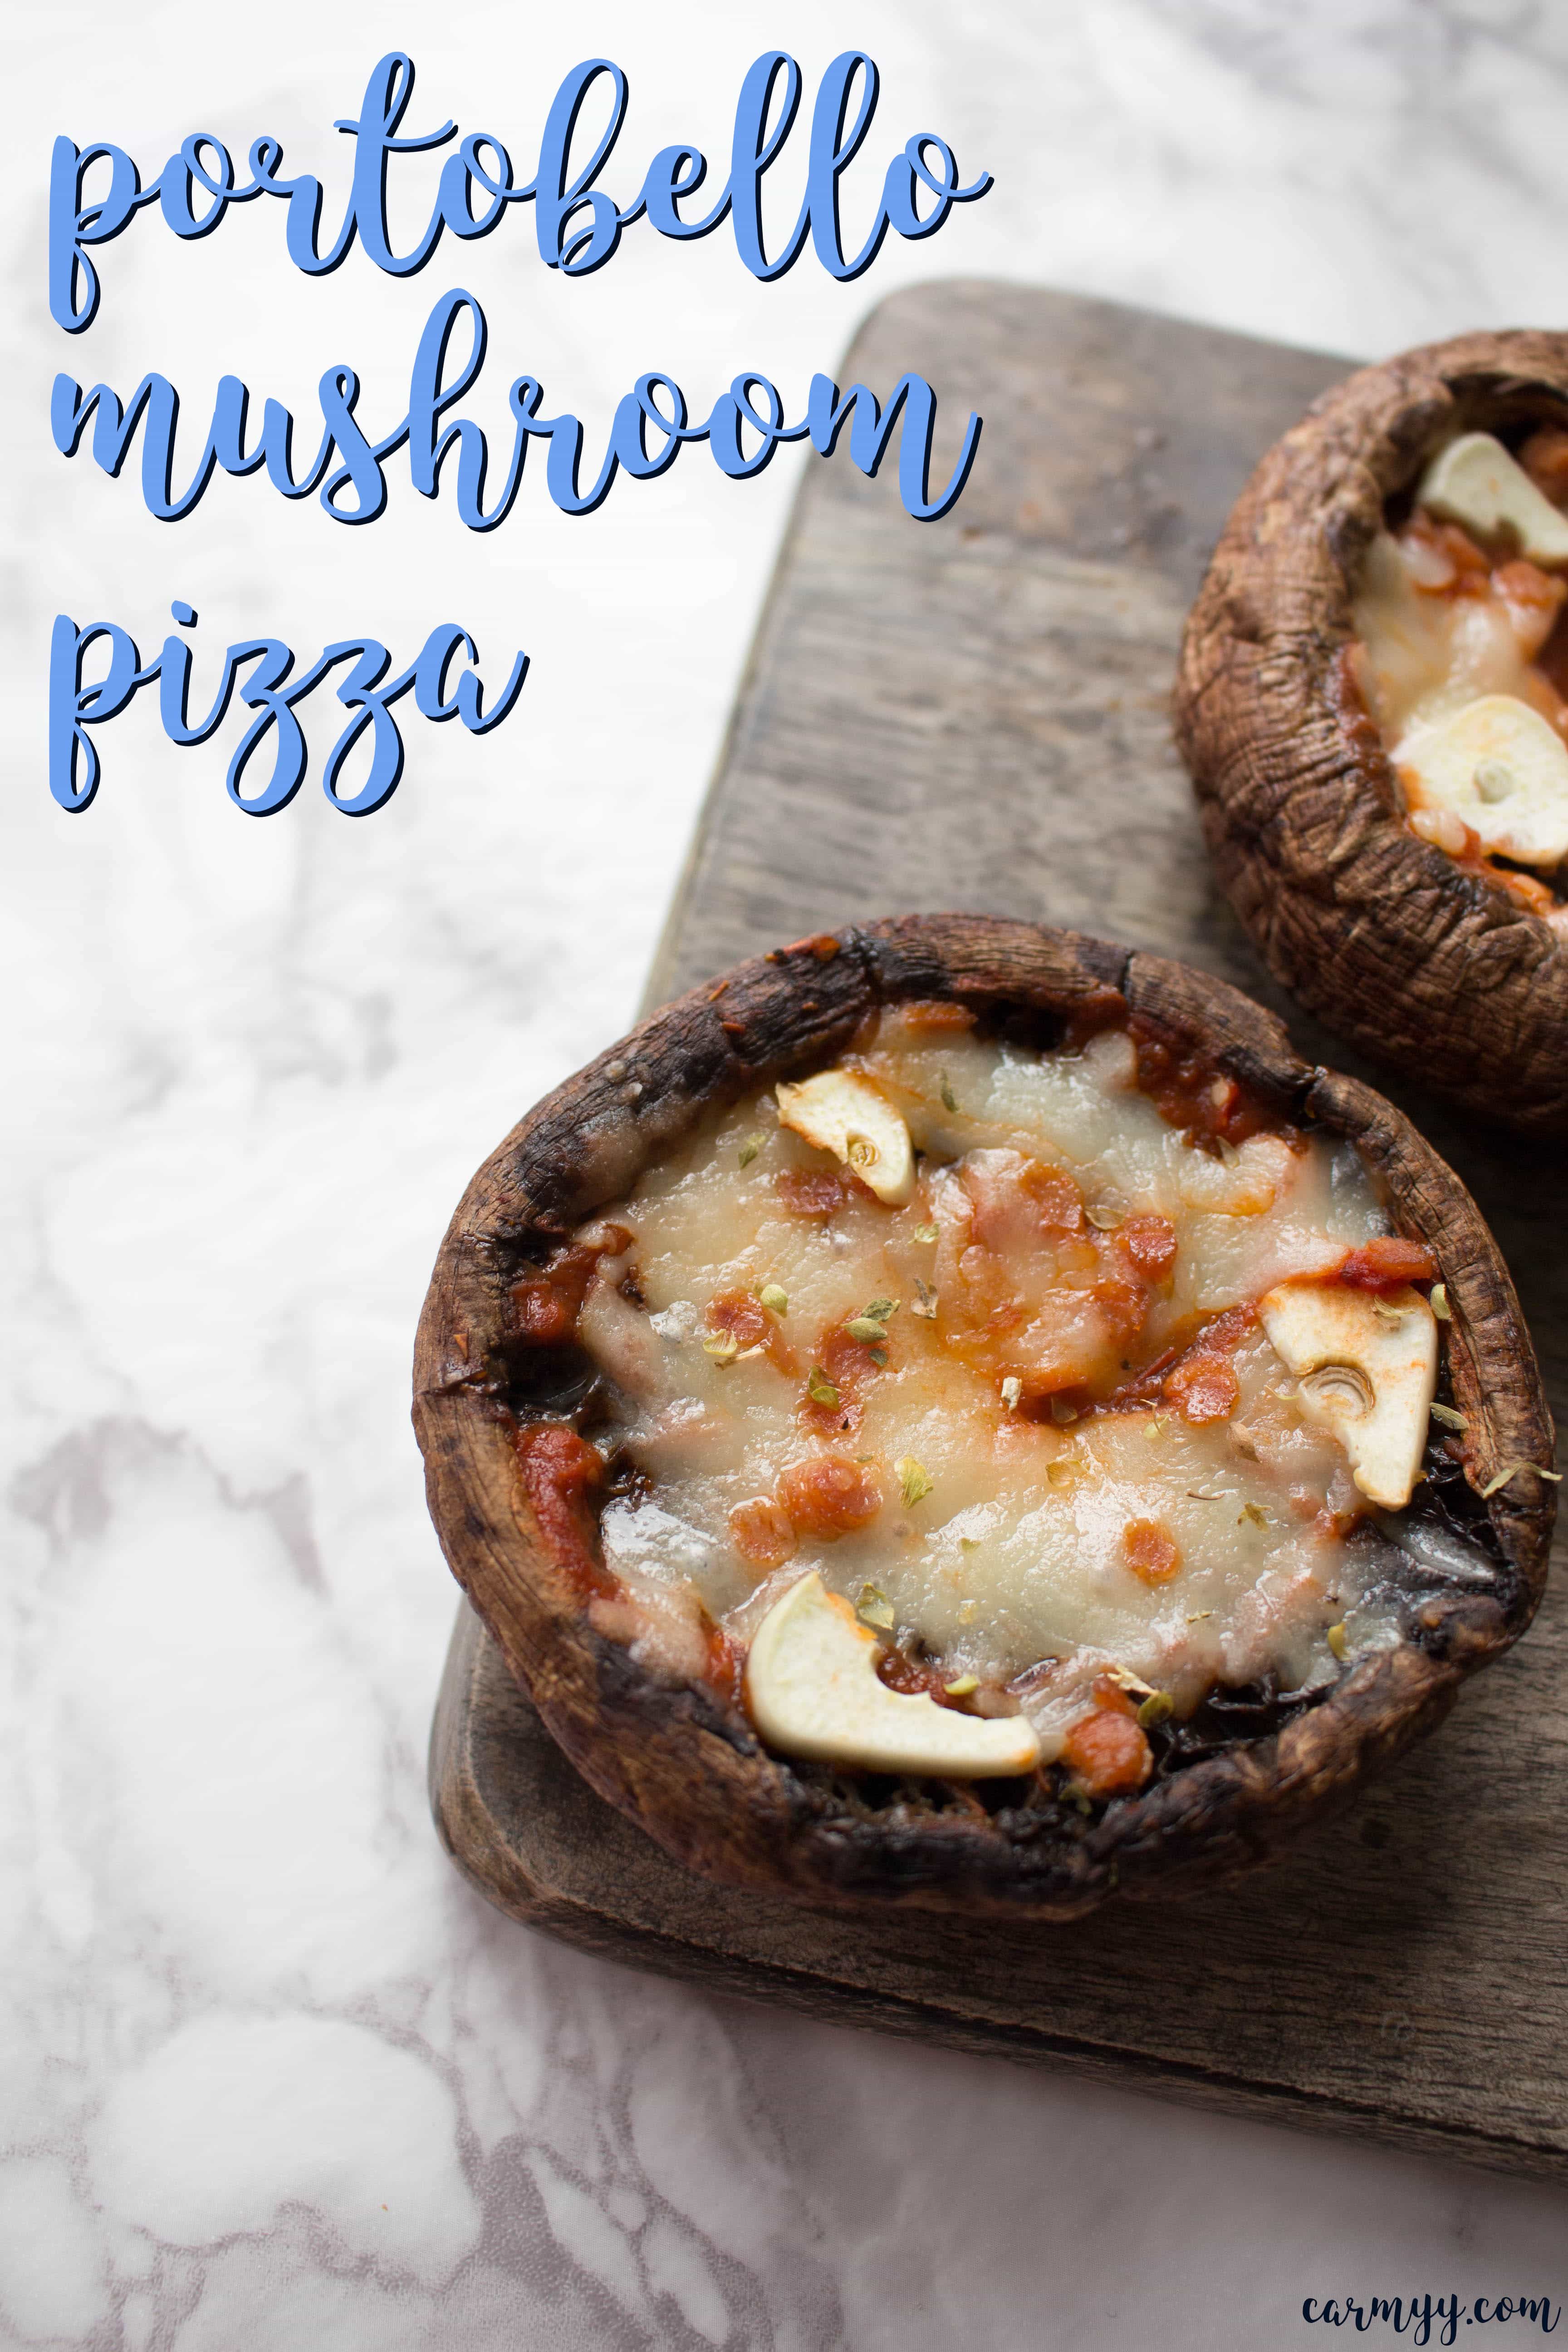 A fun healthy twist on pizza, this Portobello Mushroom Pizza recipe is healthy and will satisfy your pizza craving! Enjoy!